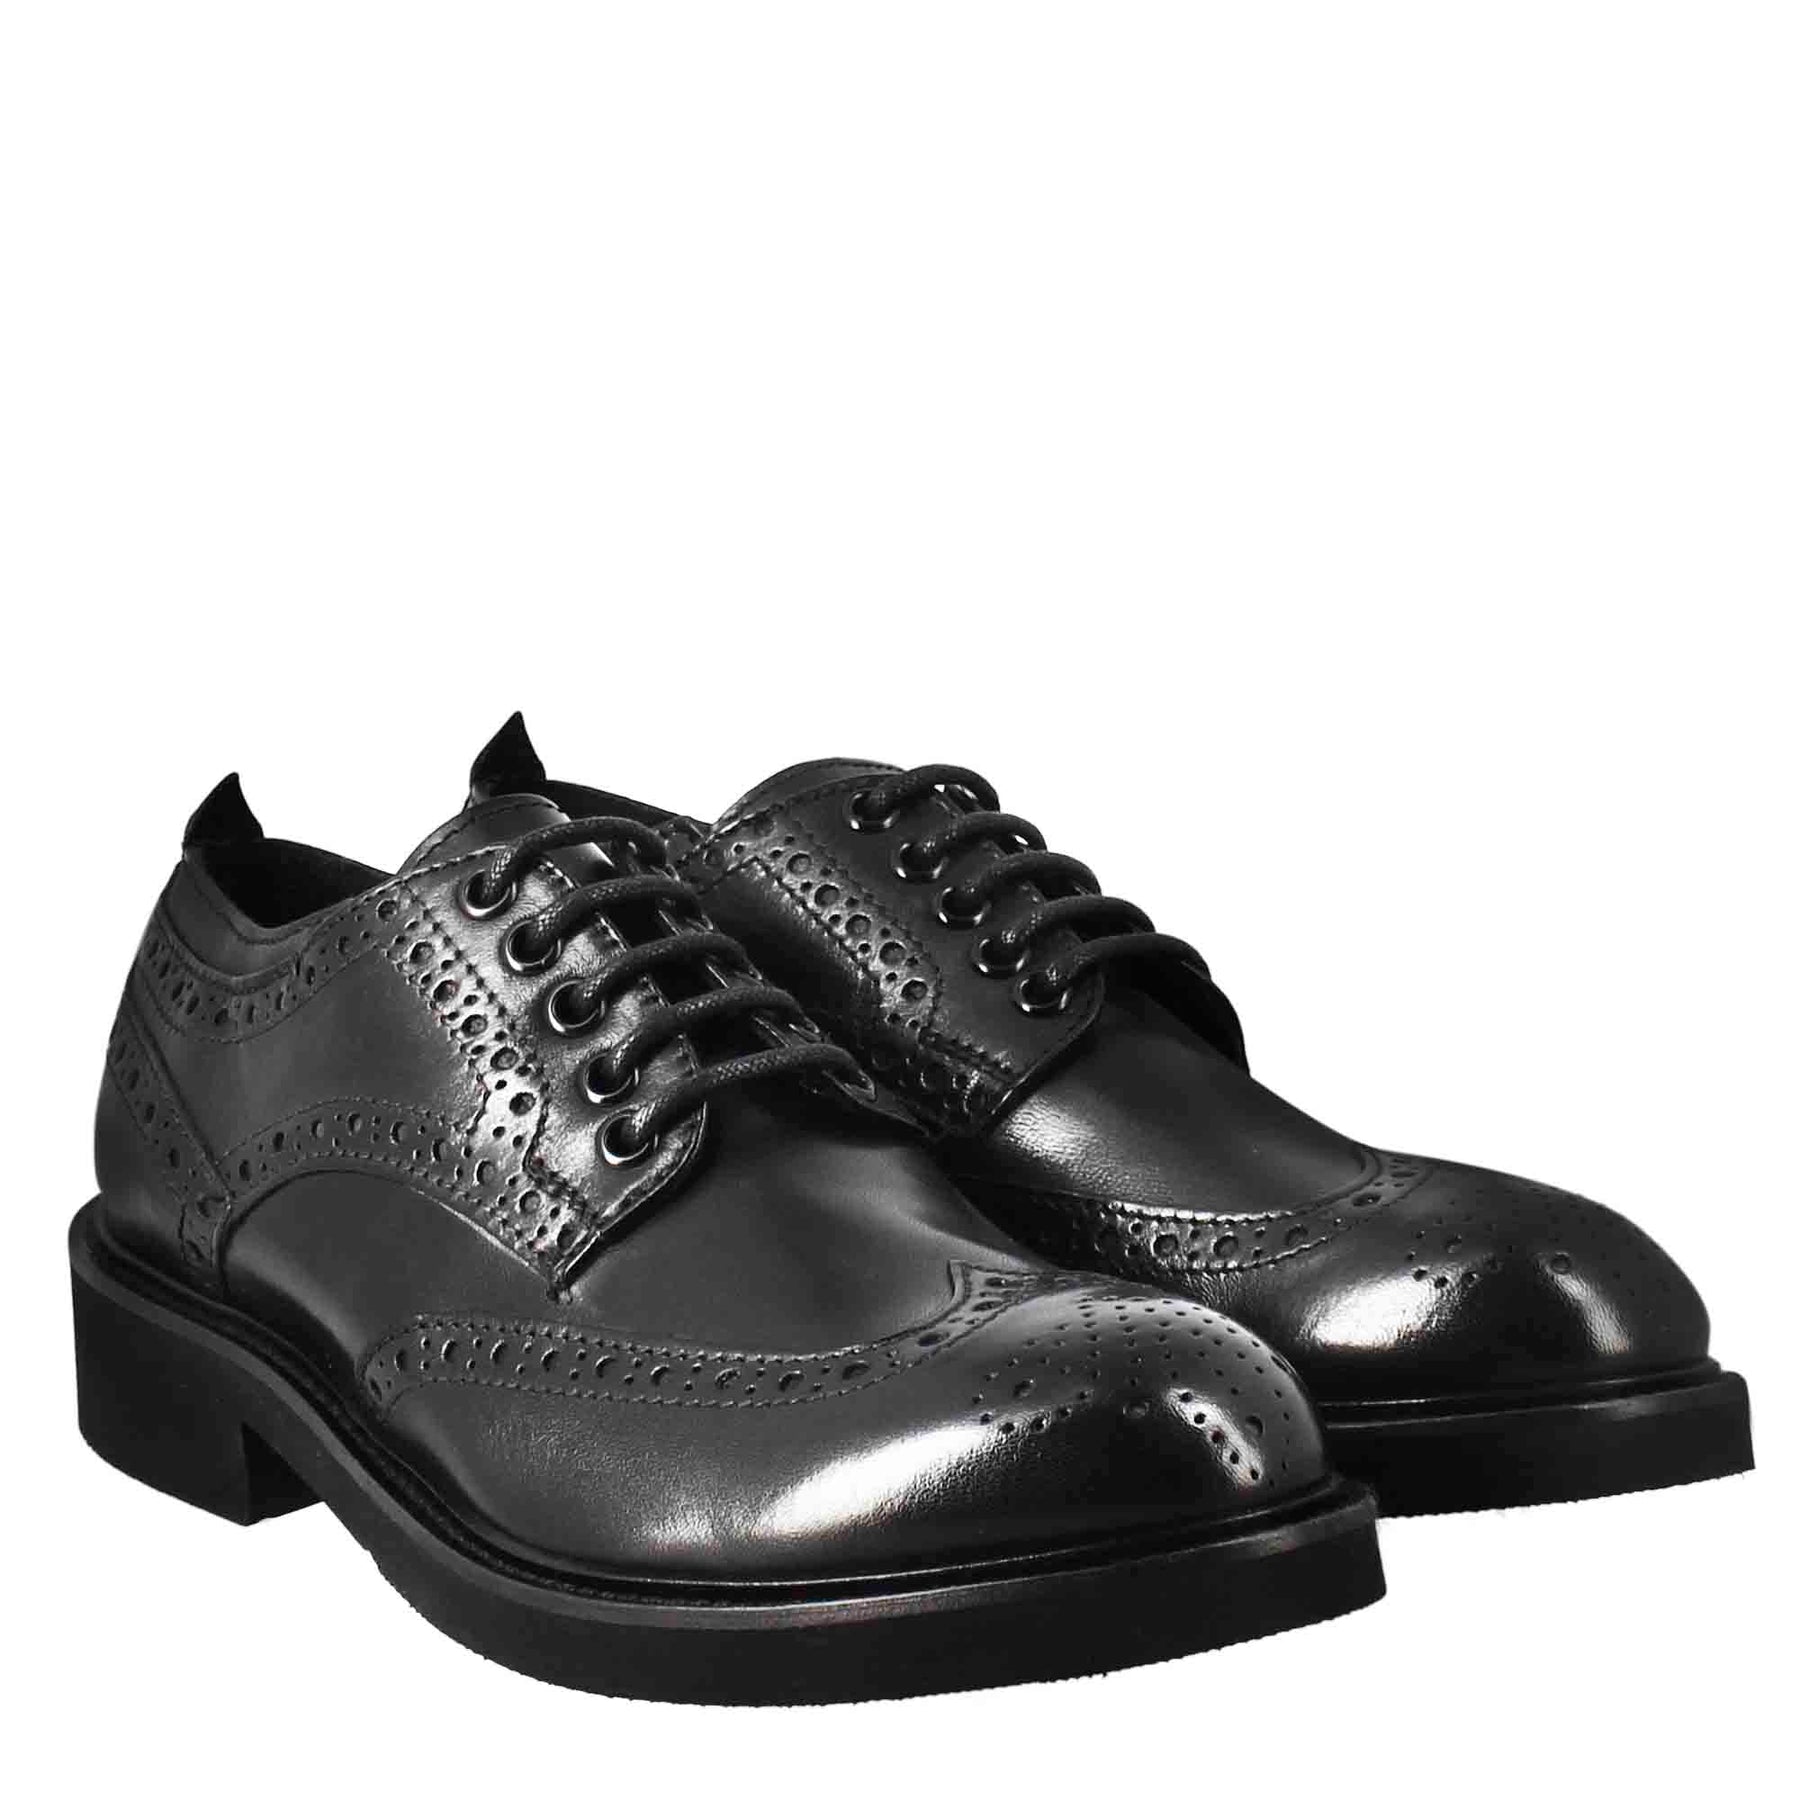 Women's derby with paupa brogue details in black washed leather